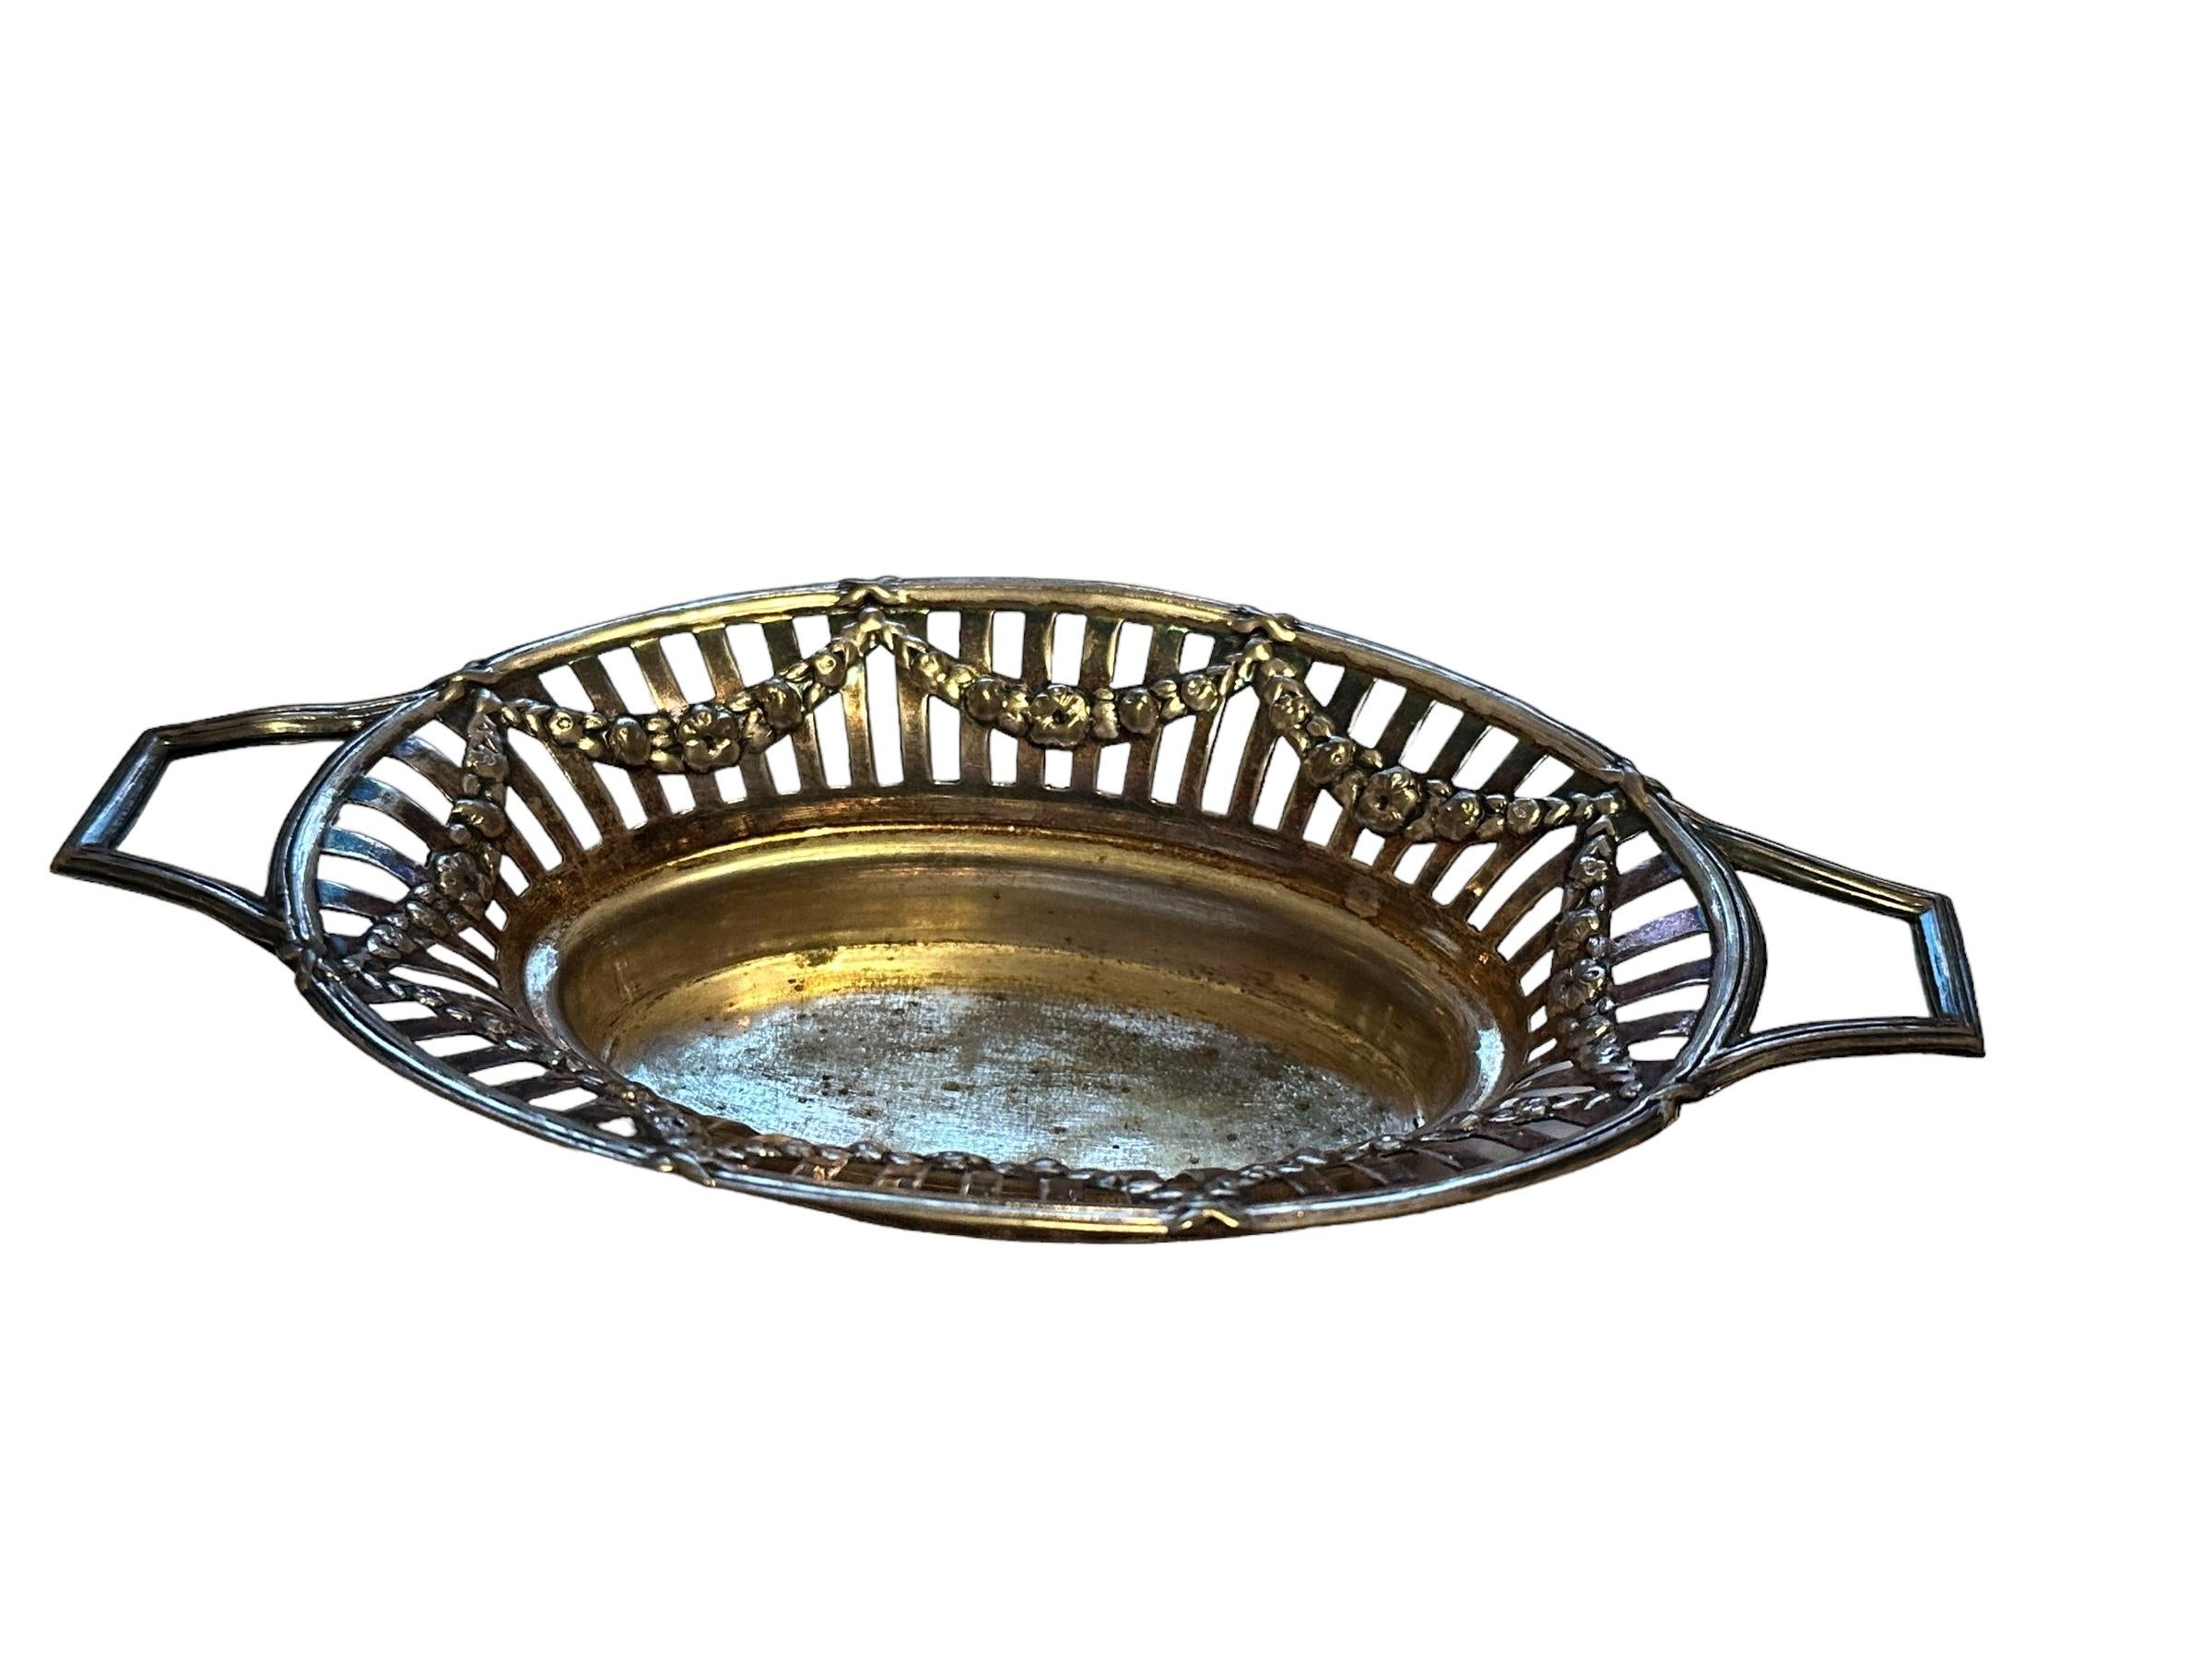 Vintage Silver Plate Candy Dish Basket Tray, 1910s, Germany or Austria In Good Condition For Sale In Nuernberg, DE